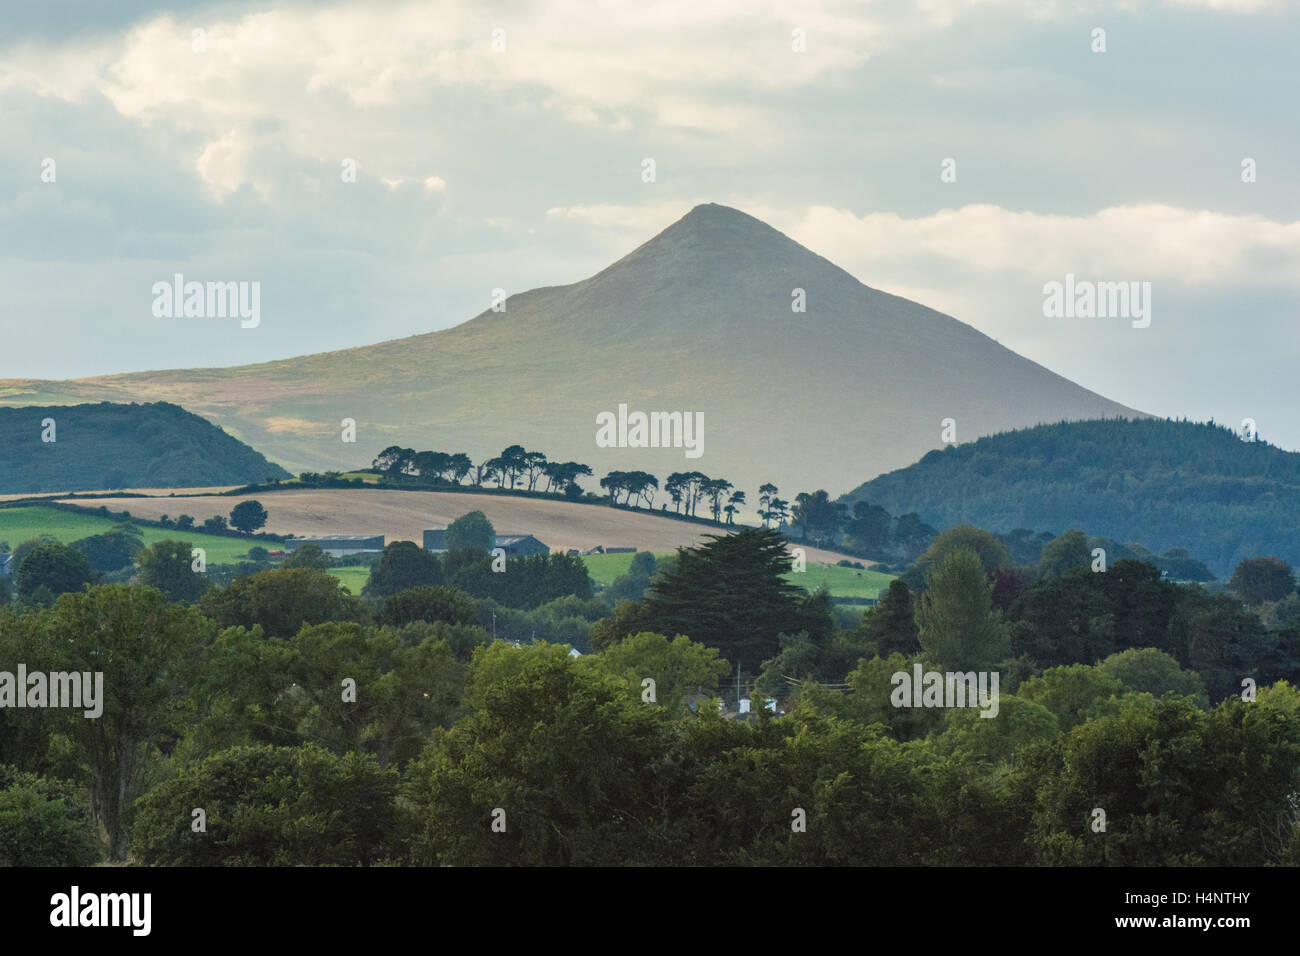 The Sugarloaf Mountain in County Wicklow in Ireland Stock Photo